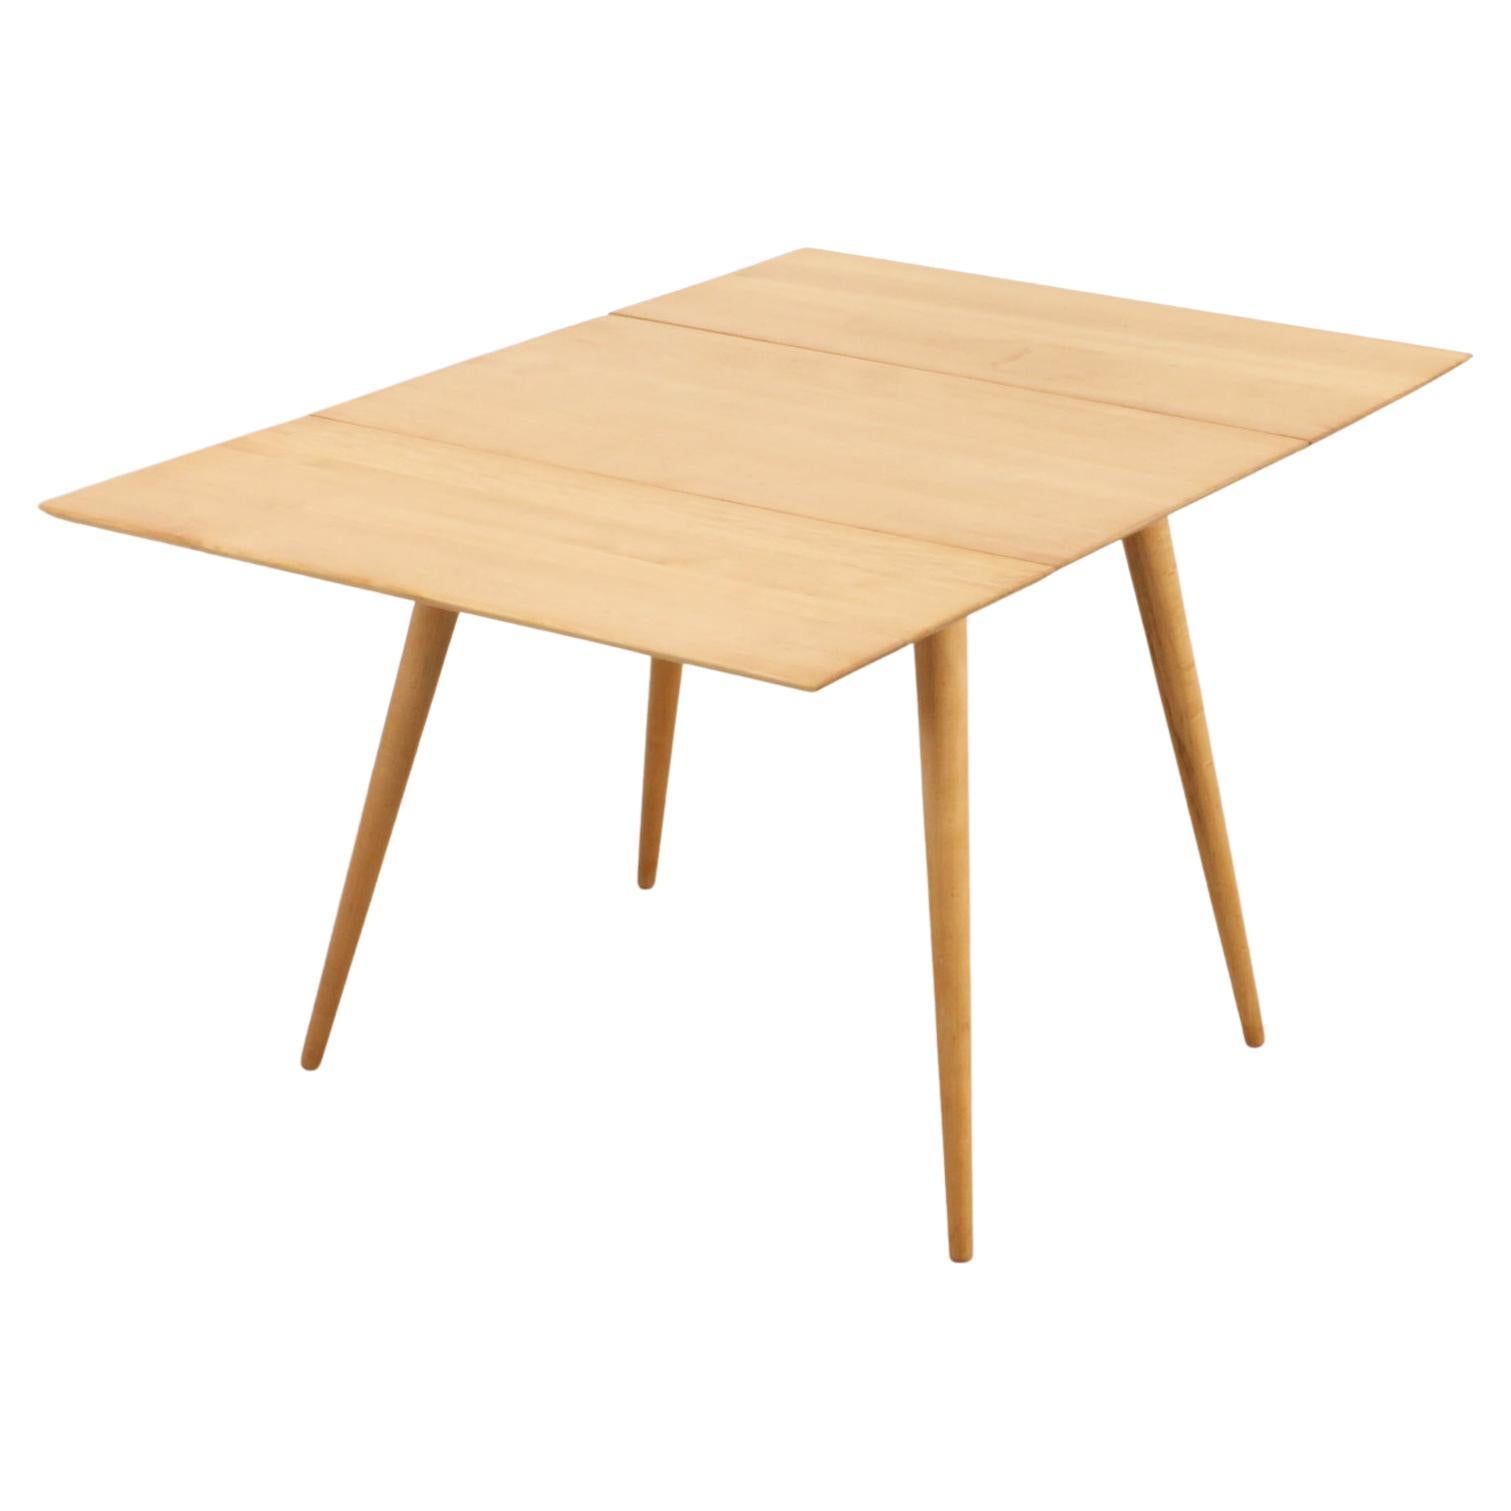 Planner Group Drop-Leaf Dining Table by Paul McCobb, USA, 1950s For Sale